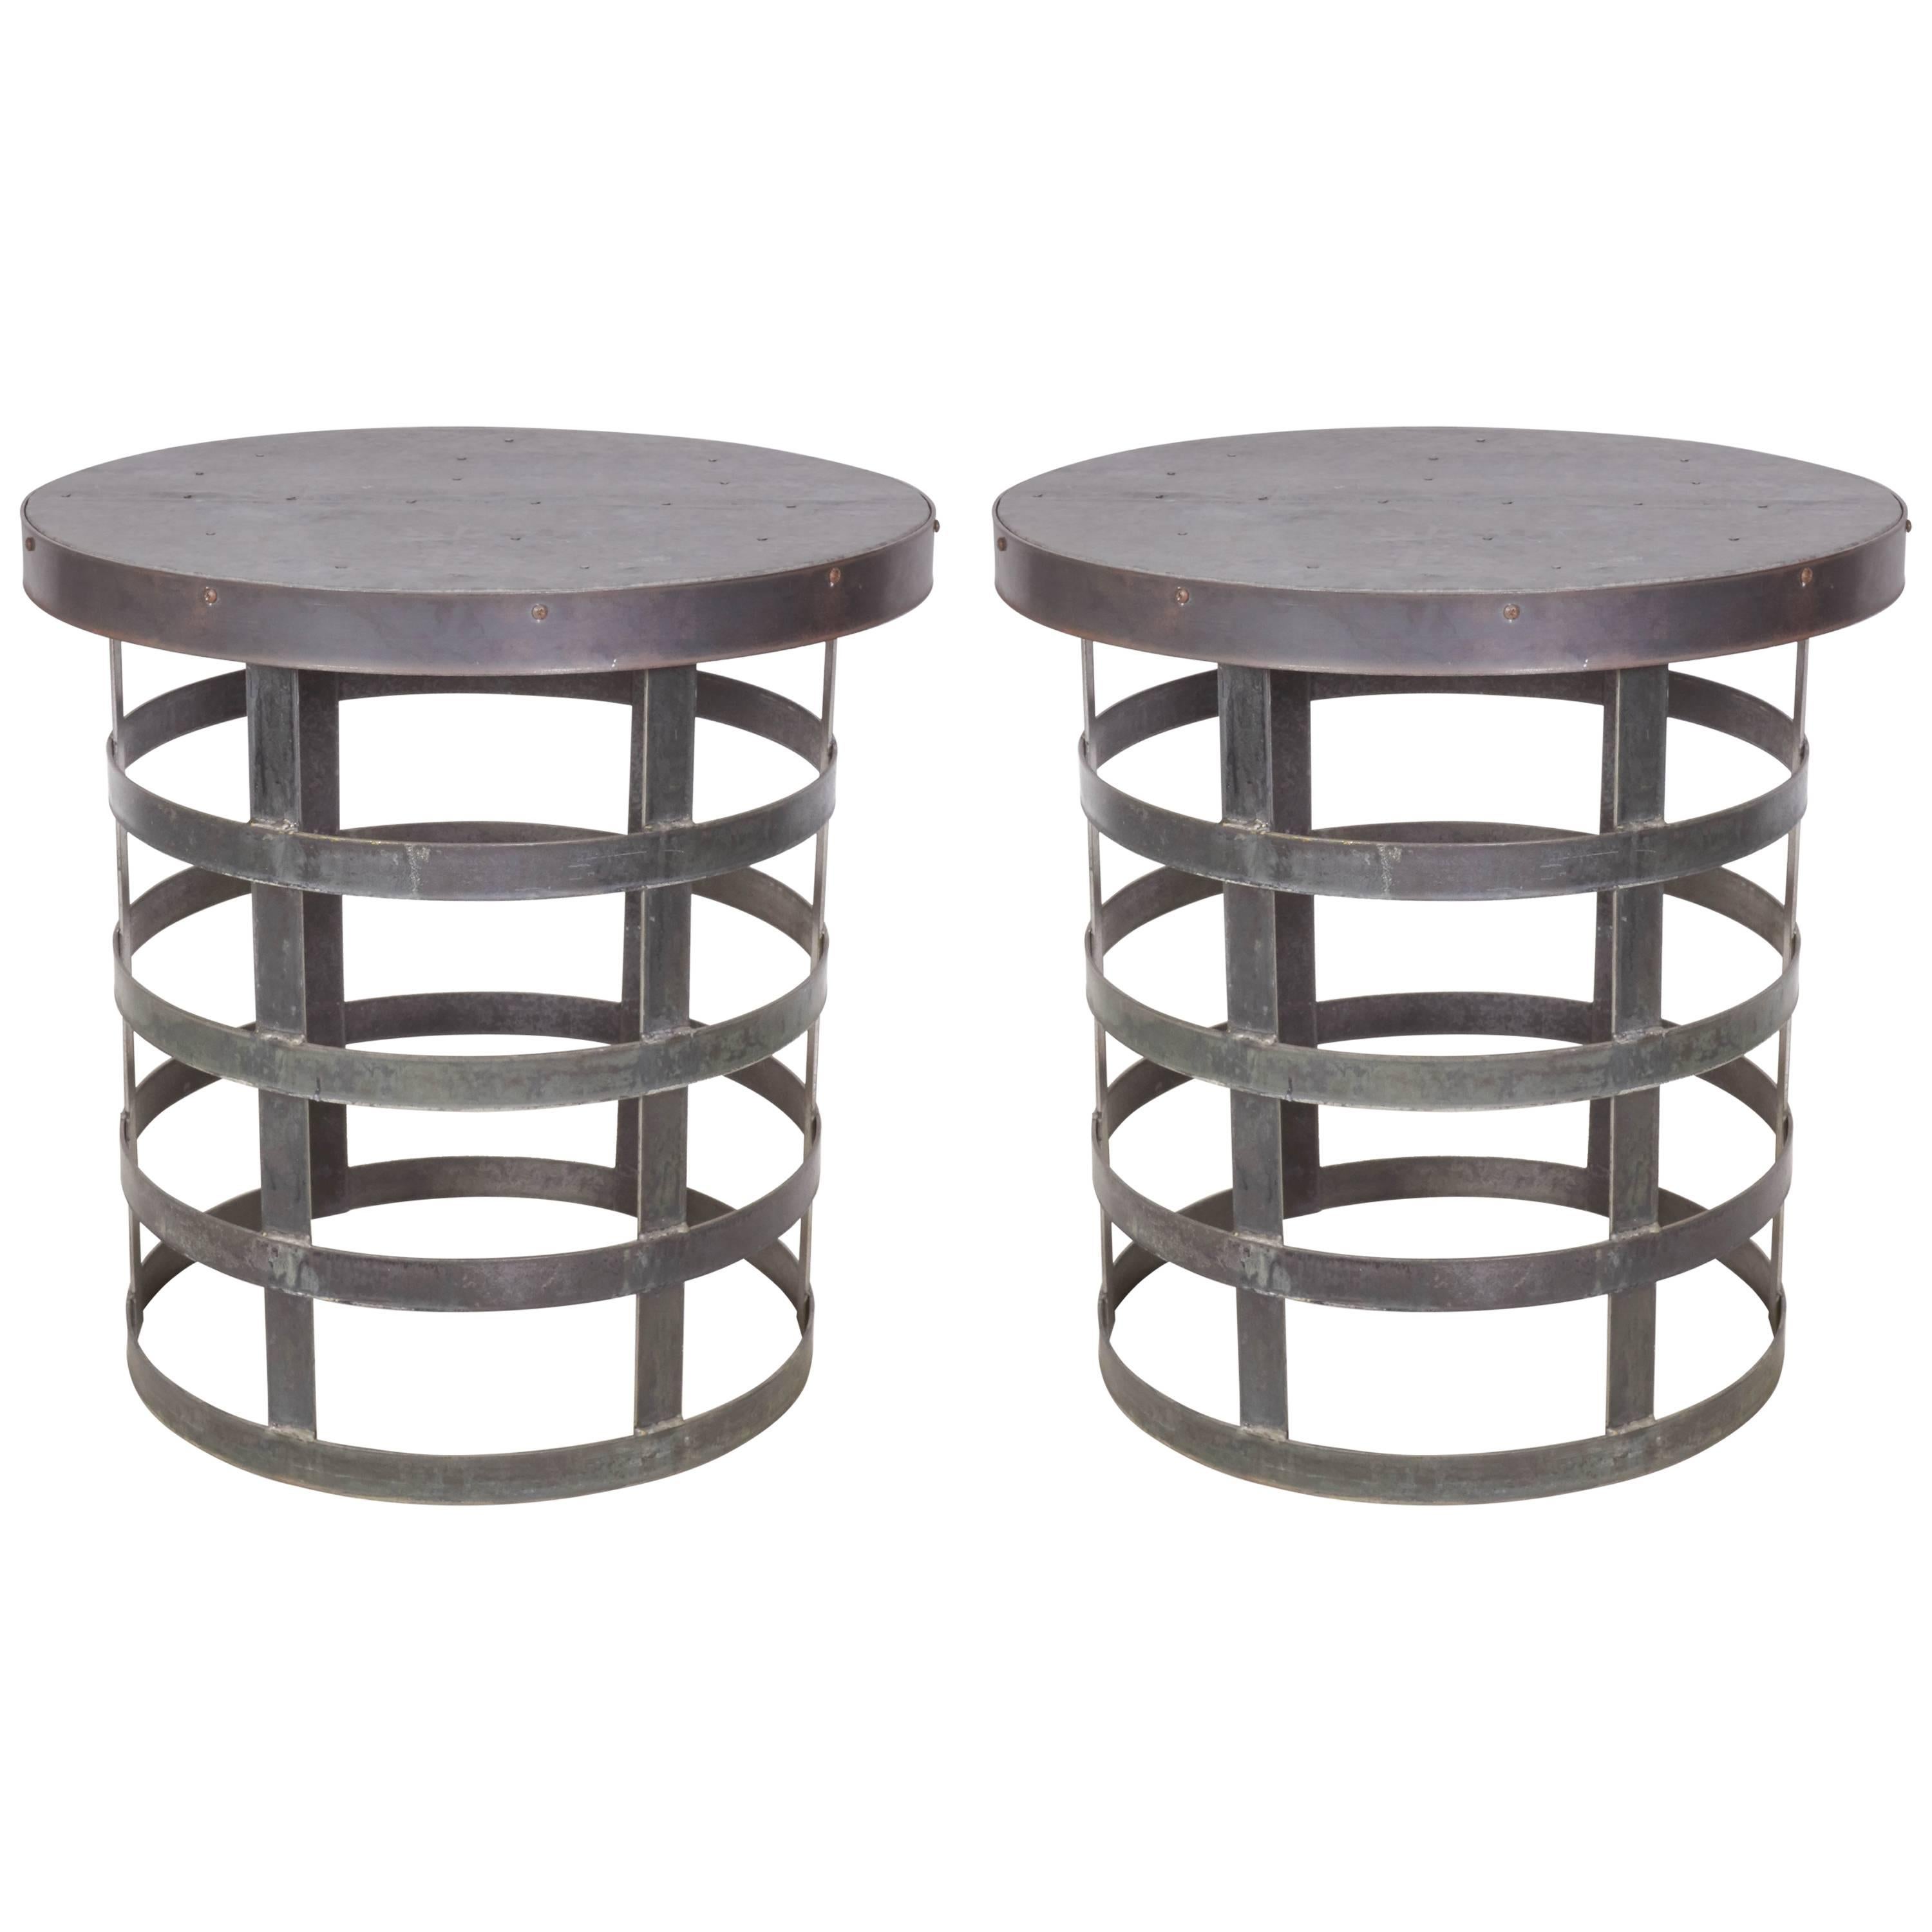 Pair of Rustic Tables Crafted in Galvanized Zinc